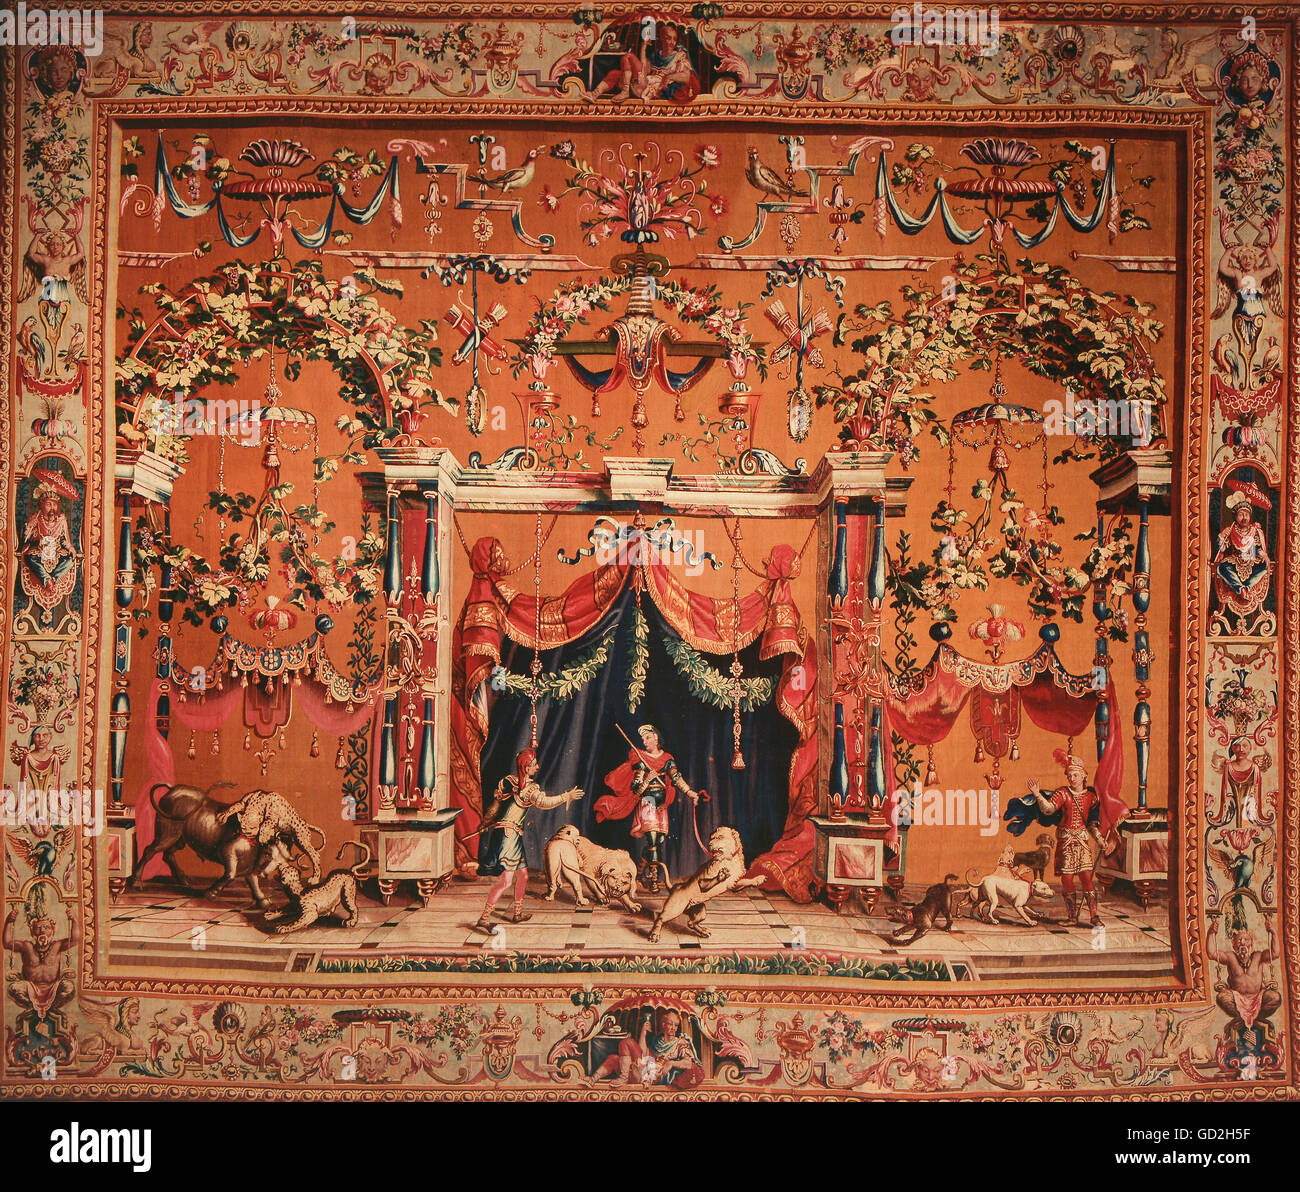 fine arts, tapestry, scenes of animal taming and animal fights in phantastic architecture, from the grotesques series, by Philippe Behagle, after design by Jean Berain, Beauvais manufactory, circa 1700, silk, wool, knitted, 327 x 393 cm, Baden State Museum, Bruchsal castle, Artist's Copyright has not to be cleared Stock Photo